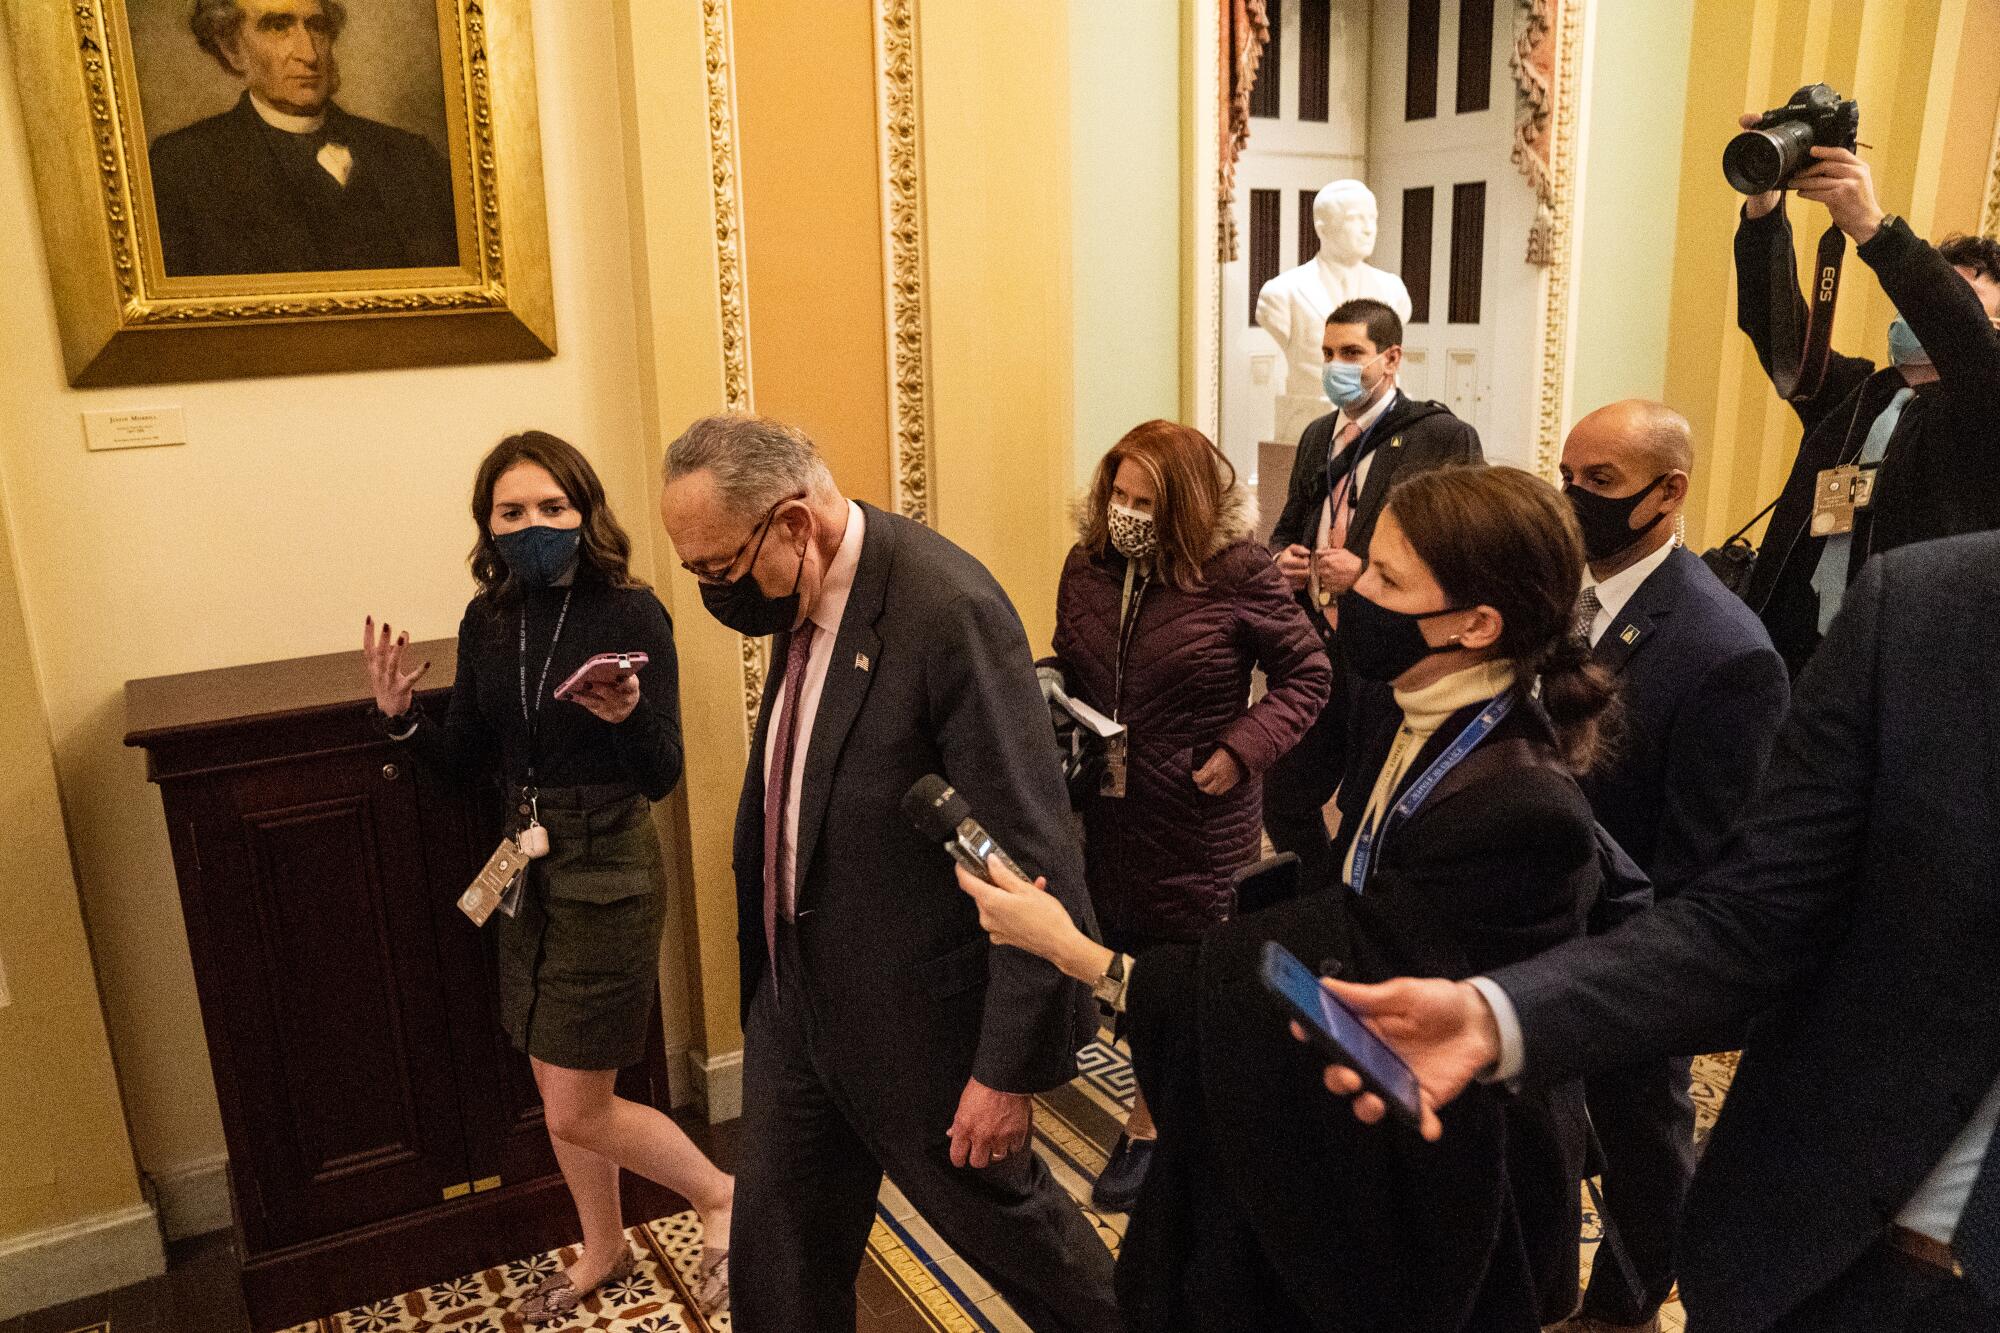 A group of reporters surround a senator in a Capitol hallway